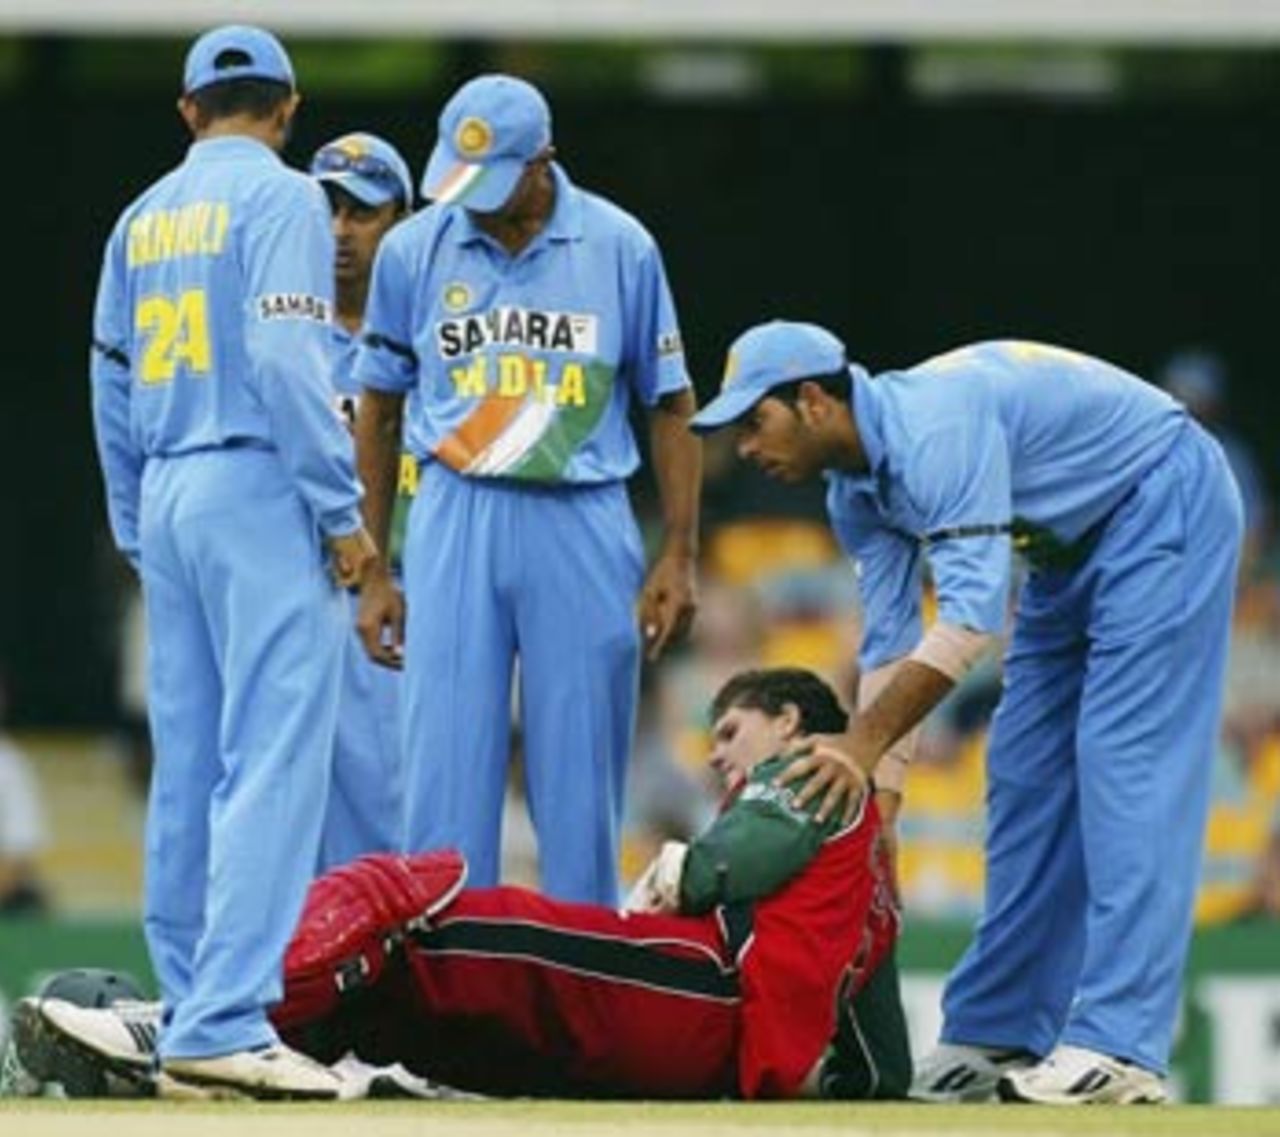 The blow to Mark Vermeulen was so sickening that even the opposition was worried, India v Zimbabwe, VB Series, Brisbane, 6th ODI, January 20, 2004